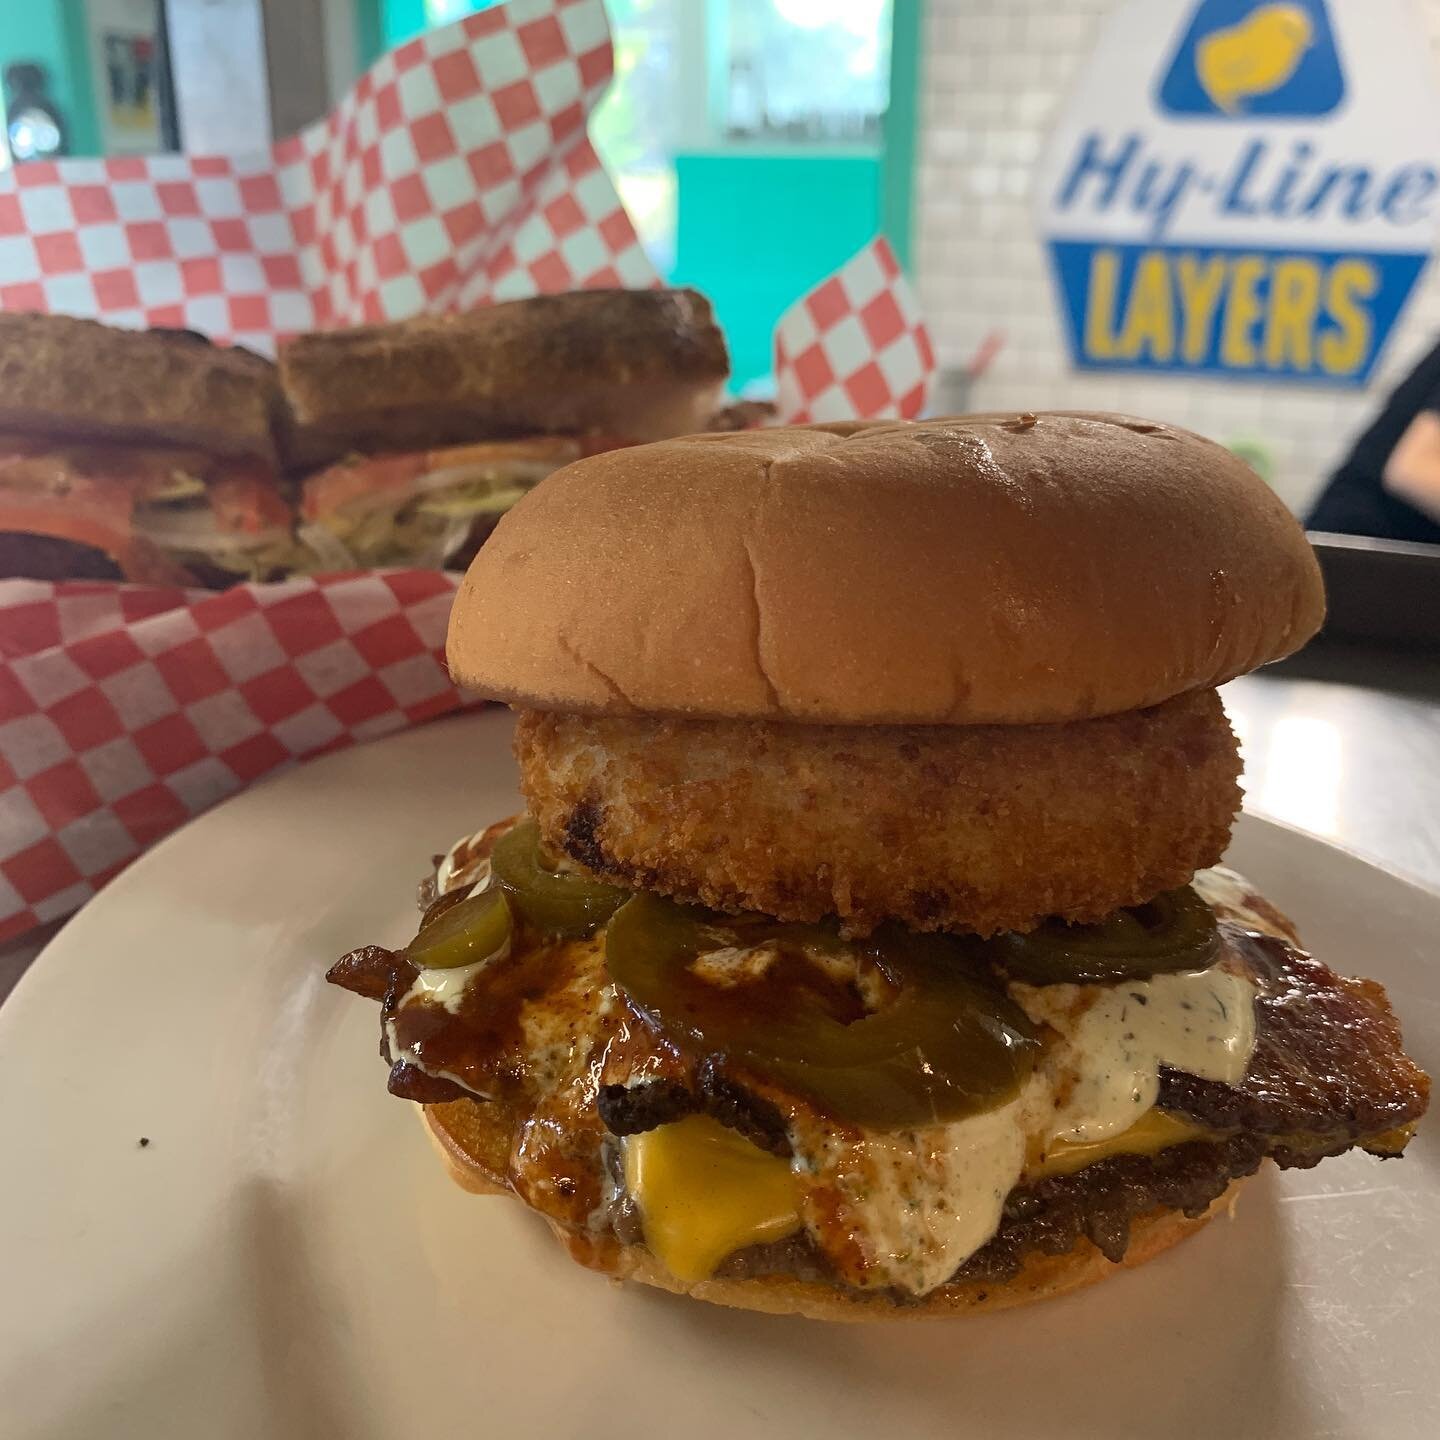 We are unfortunately going to be closed this weekend 😓 so come in and get your Lou&rsquo;s fix today! Open from 11-3 today. This gold rush burger is waiting for you 🍔🤠